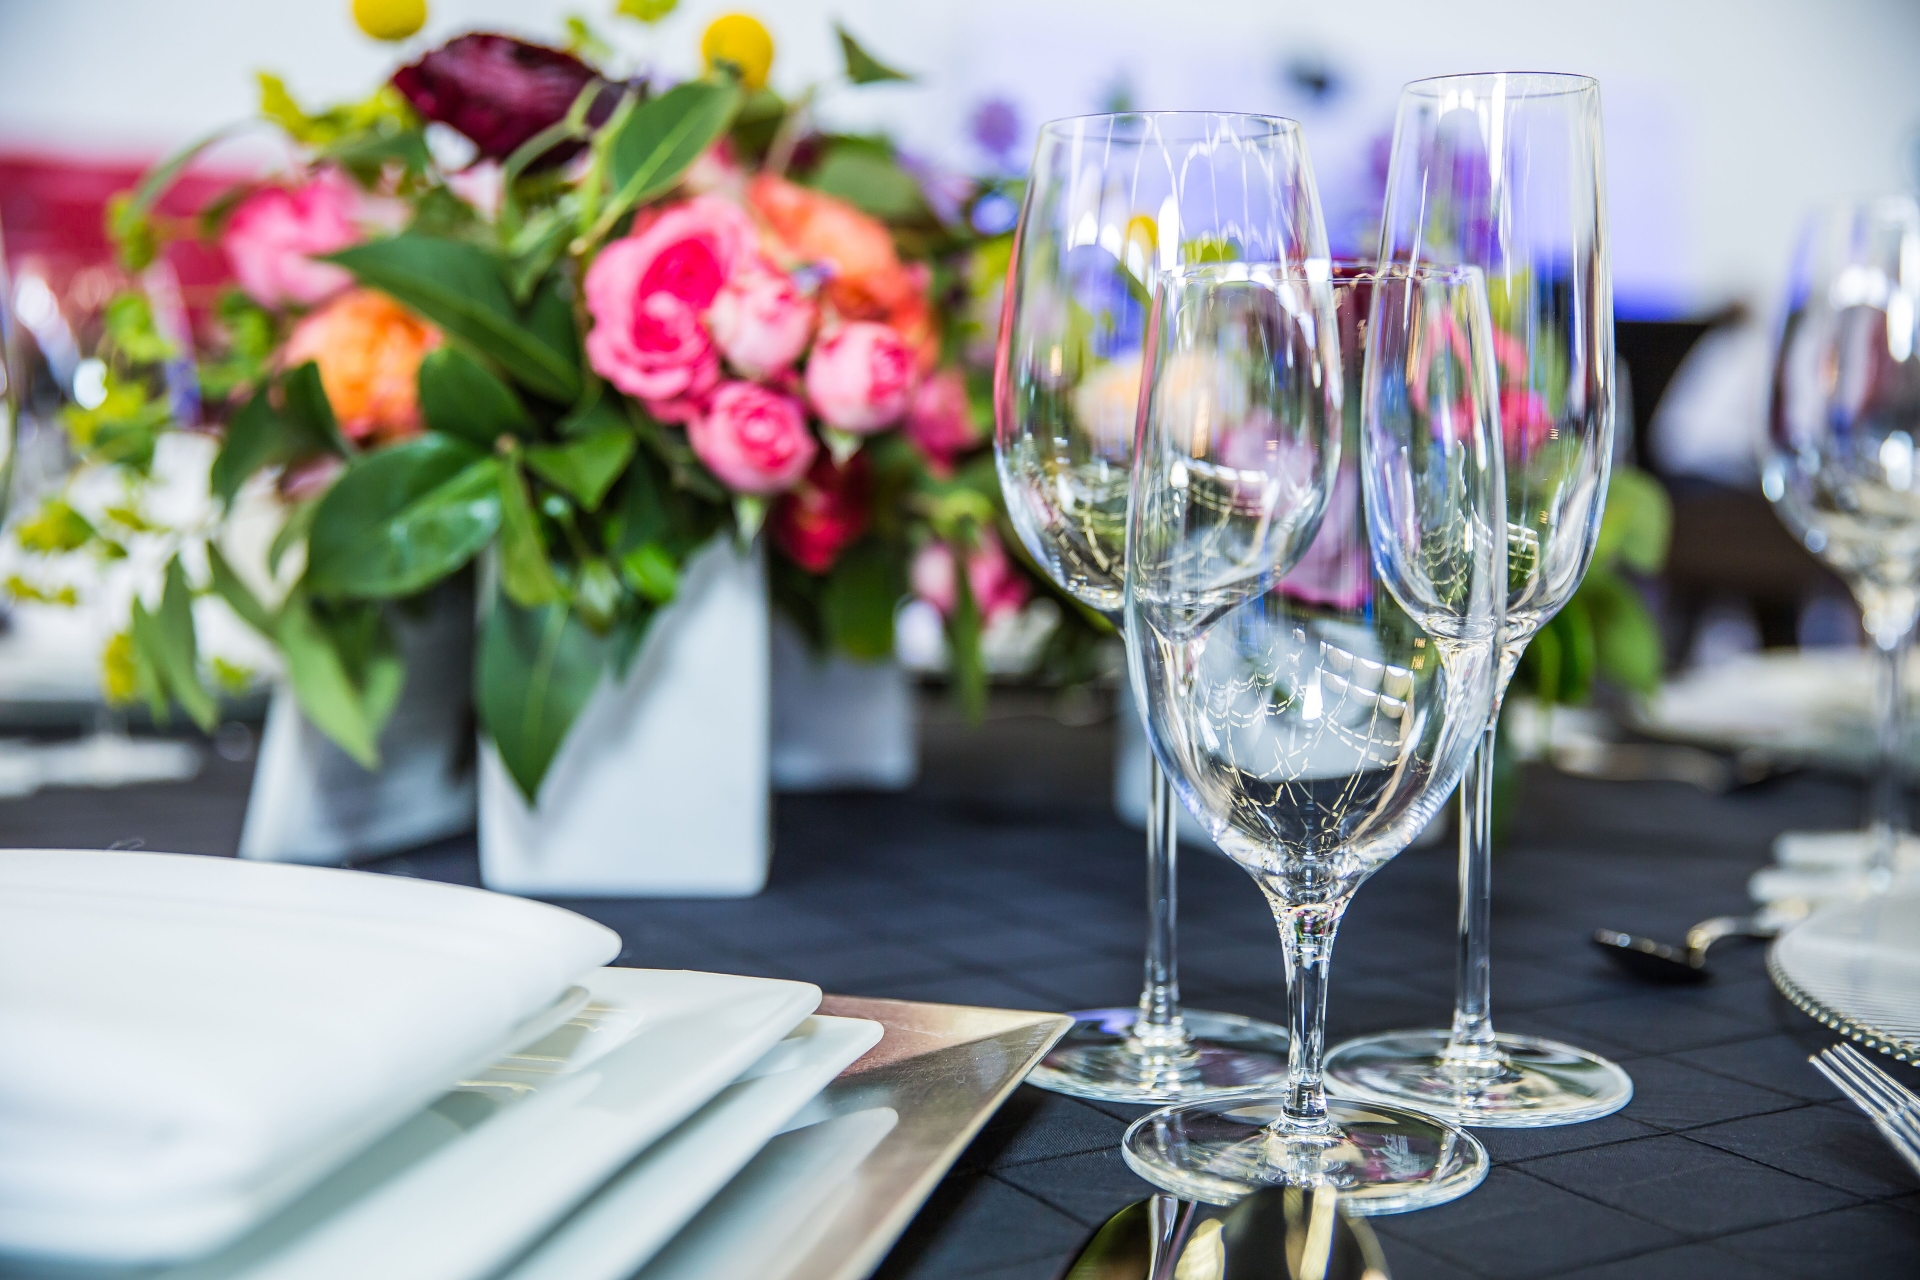 Services &#8211; Events &#8211; Full, Dallas Fort Worth Catering &middot; G Texas Catering